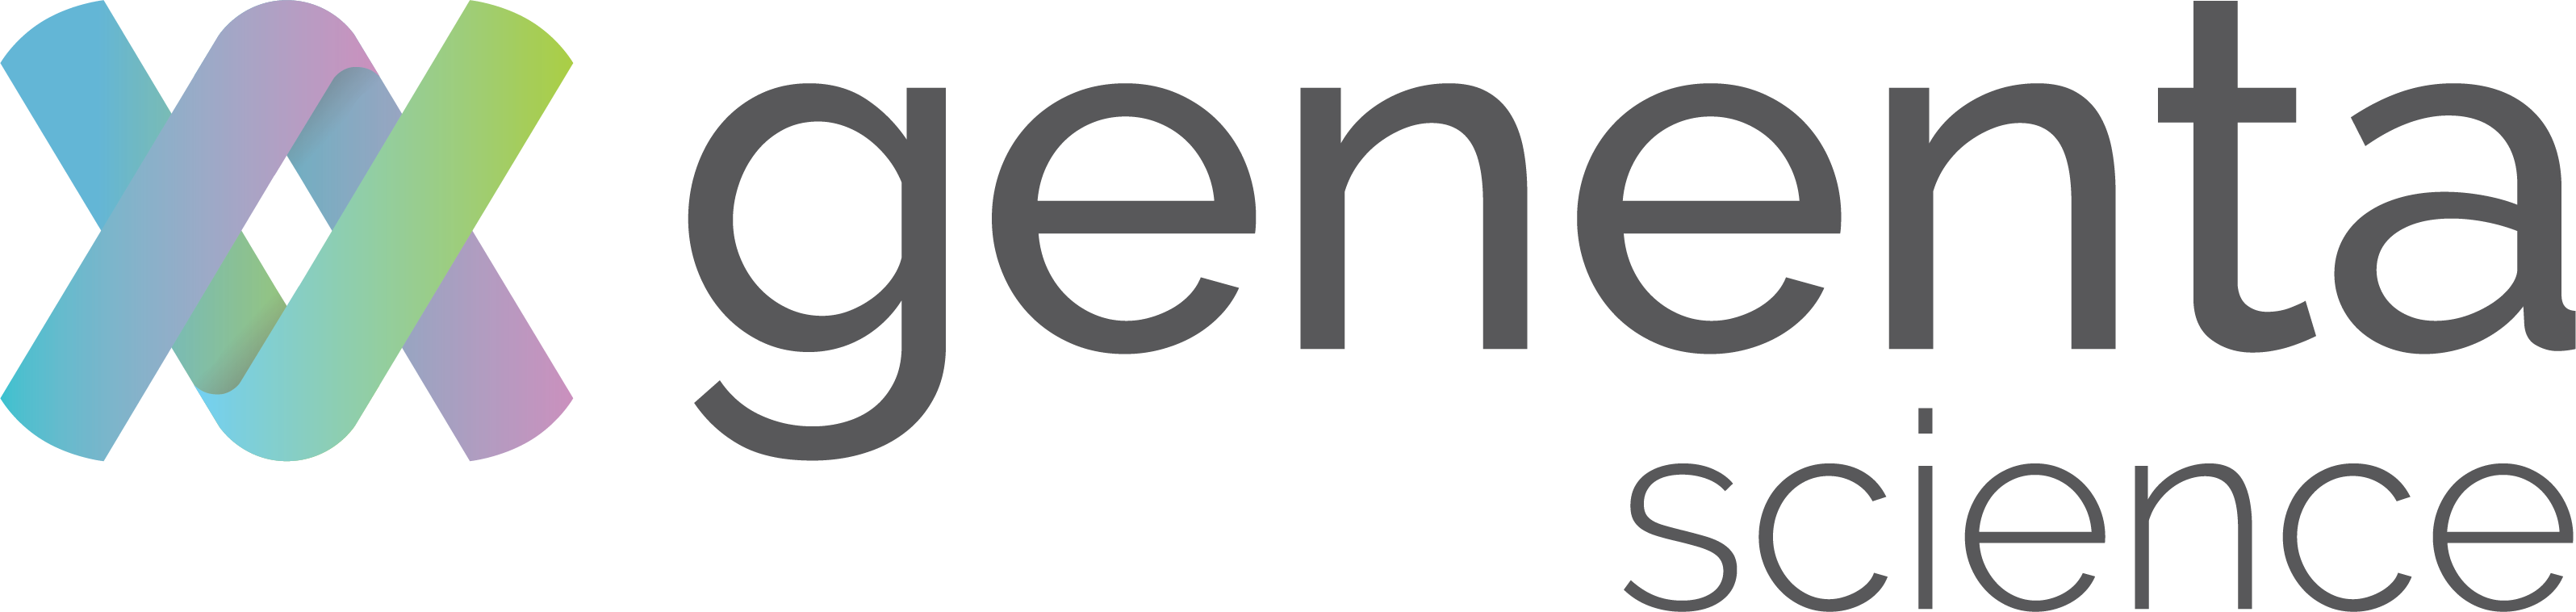 Genenta Announces Ongoing Clinical Trial Progress and Proposed Expansion in Solid Tumor Treatments